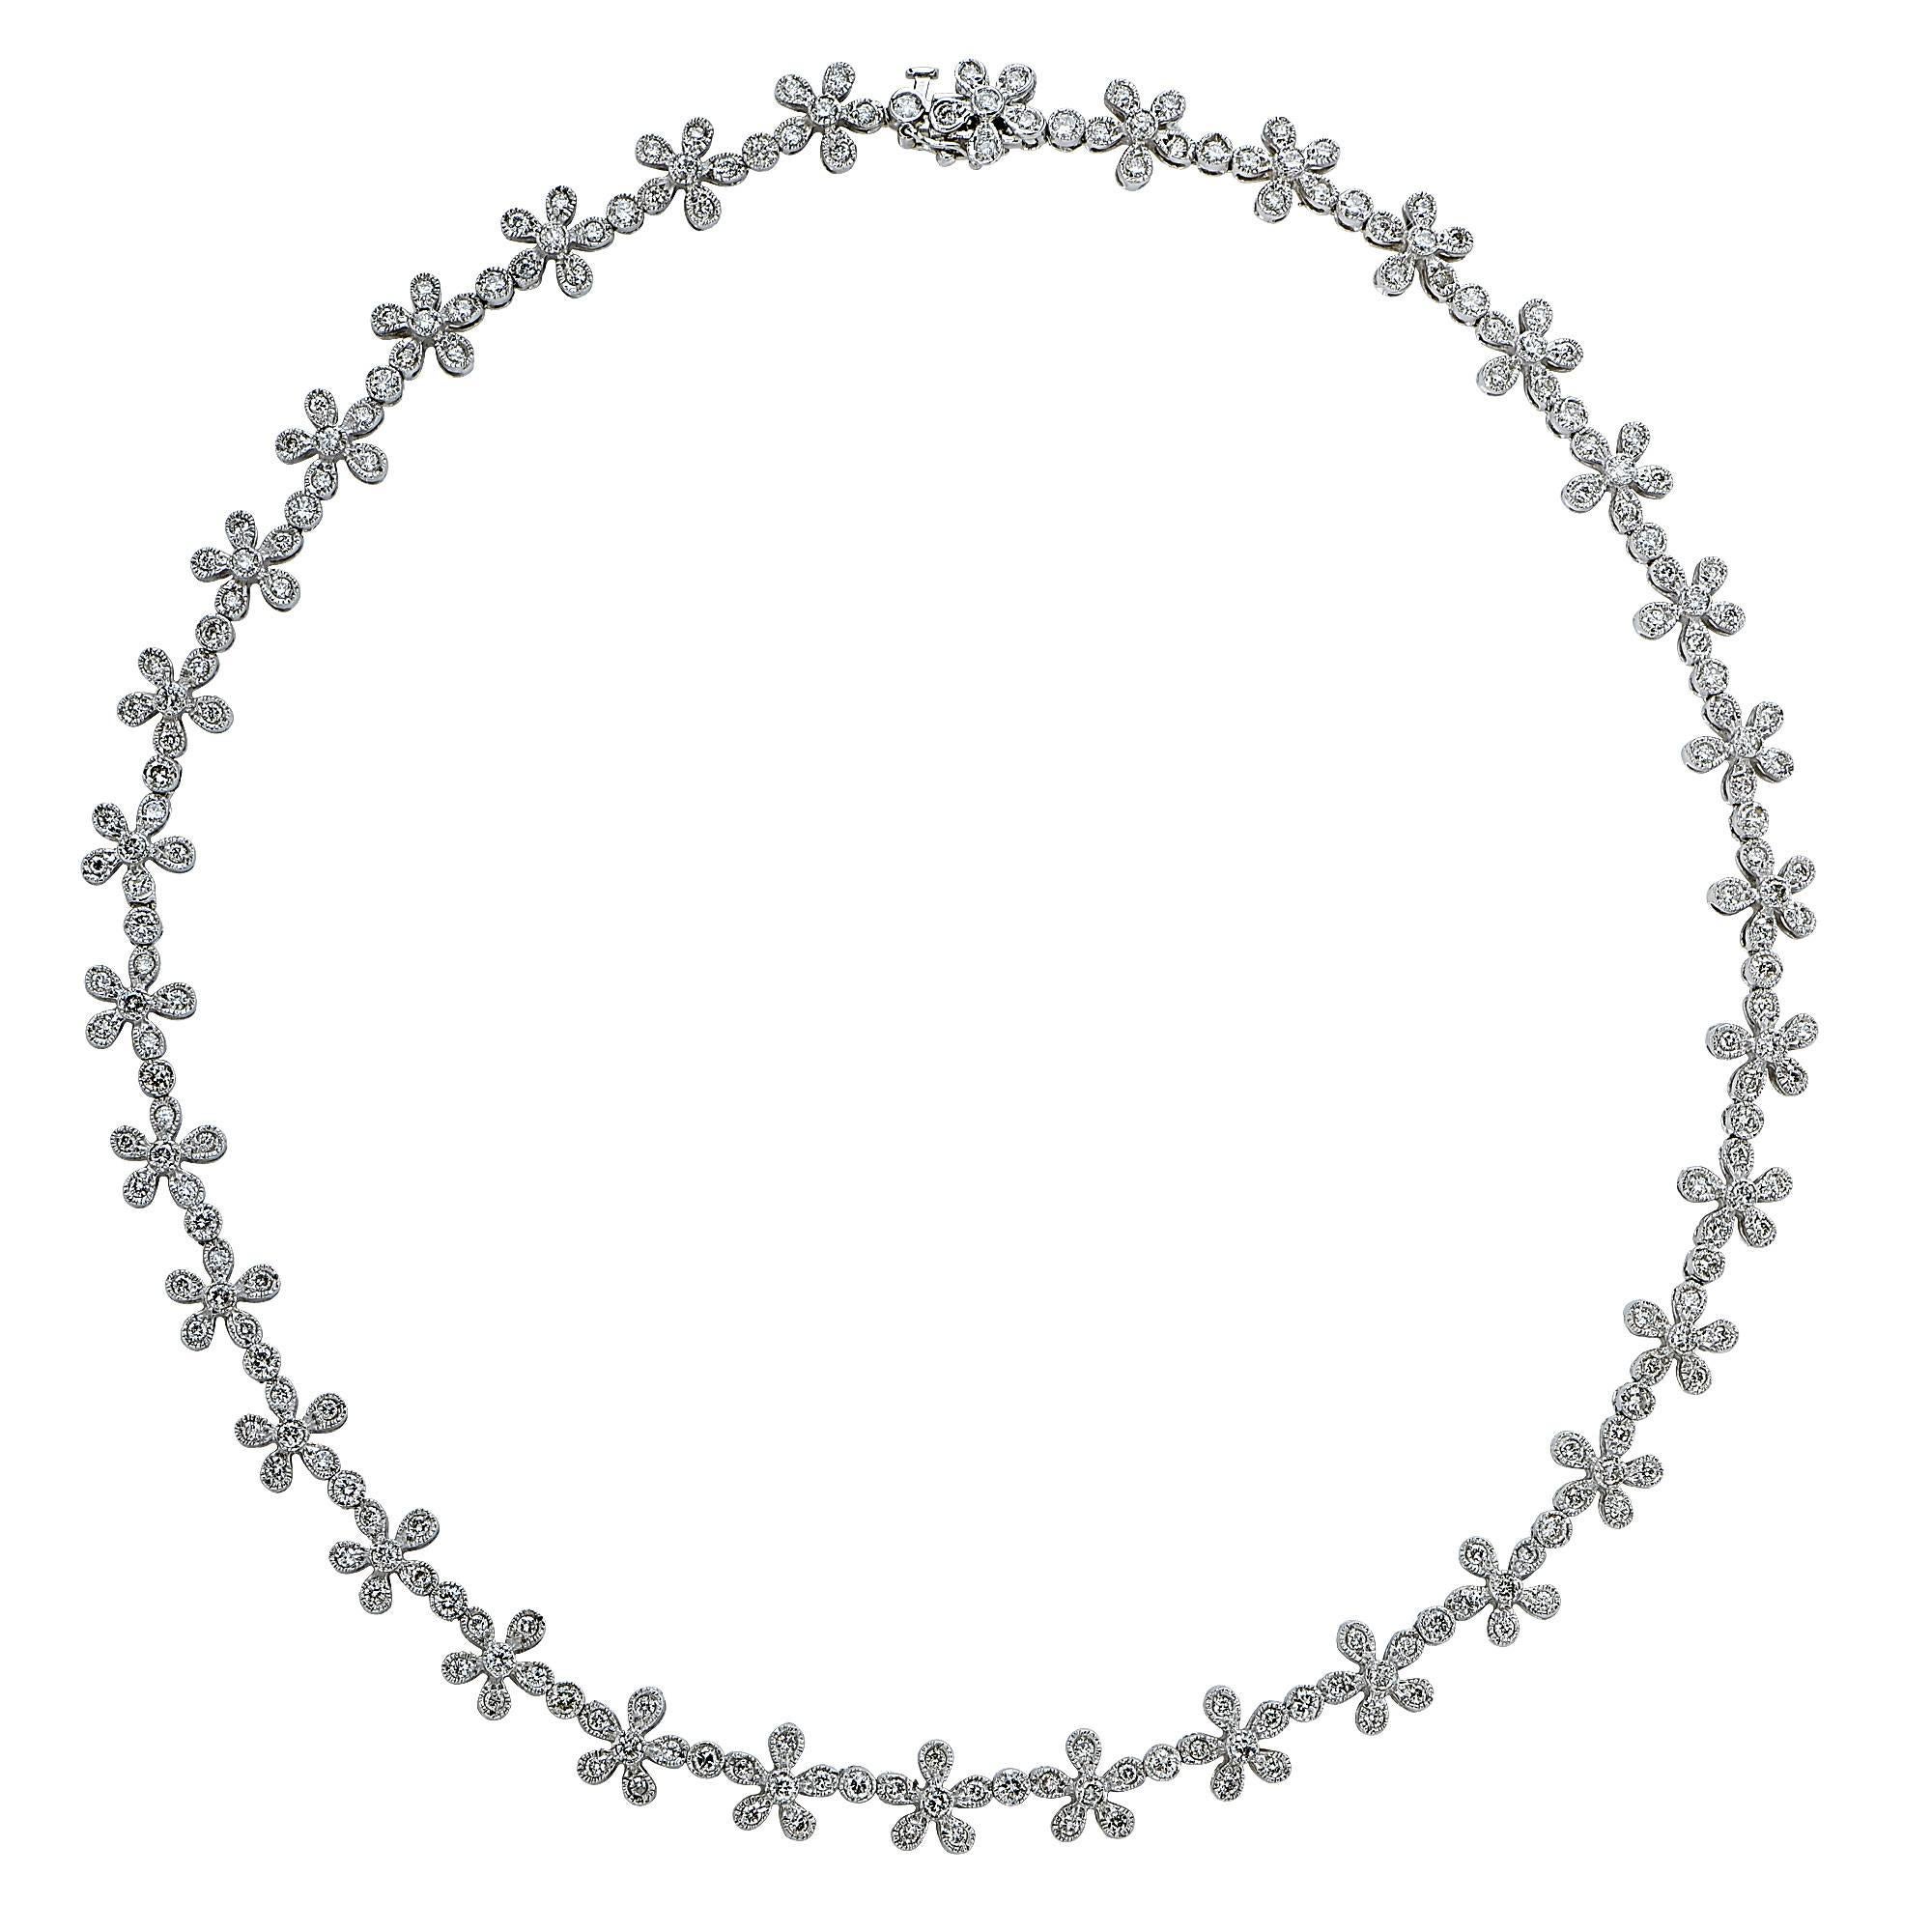 18k white gold necklace featuring 238 round brilliant cut diamonds weighing approximately 5.60cts total, G color, VS-SI clarity.

Metal weight: 27.67 grams

This diamond necklace is accompanied by a retail appraisal performed by a Graduate